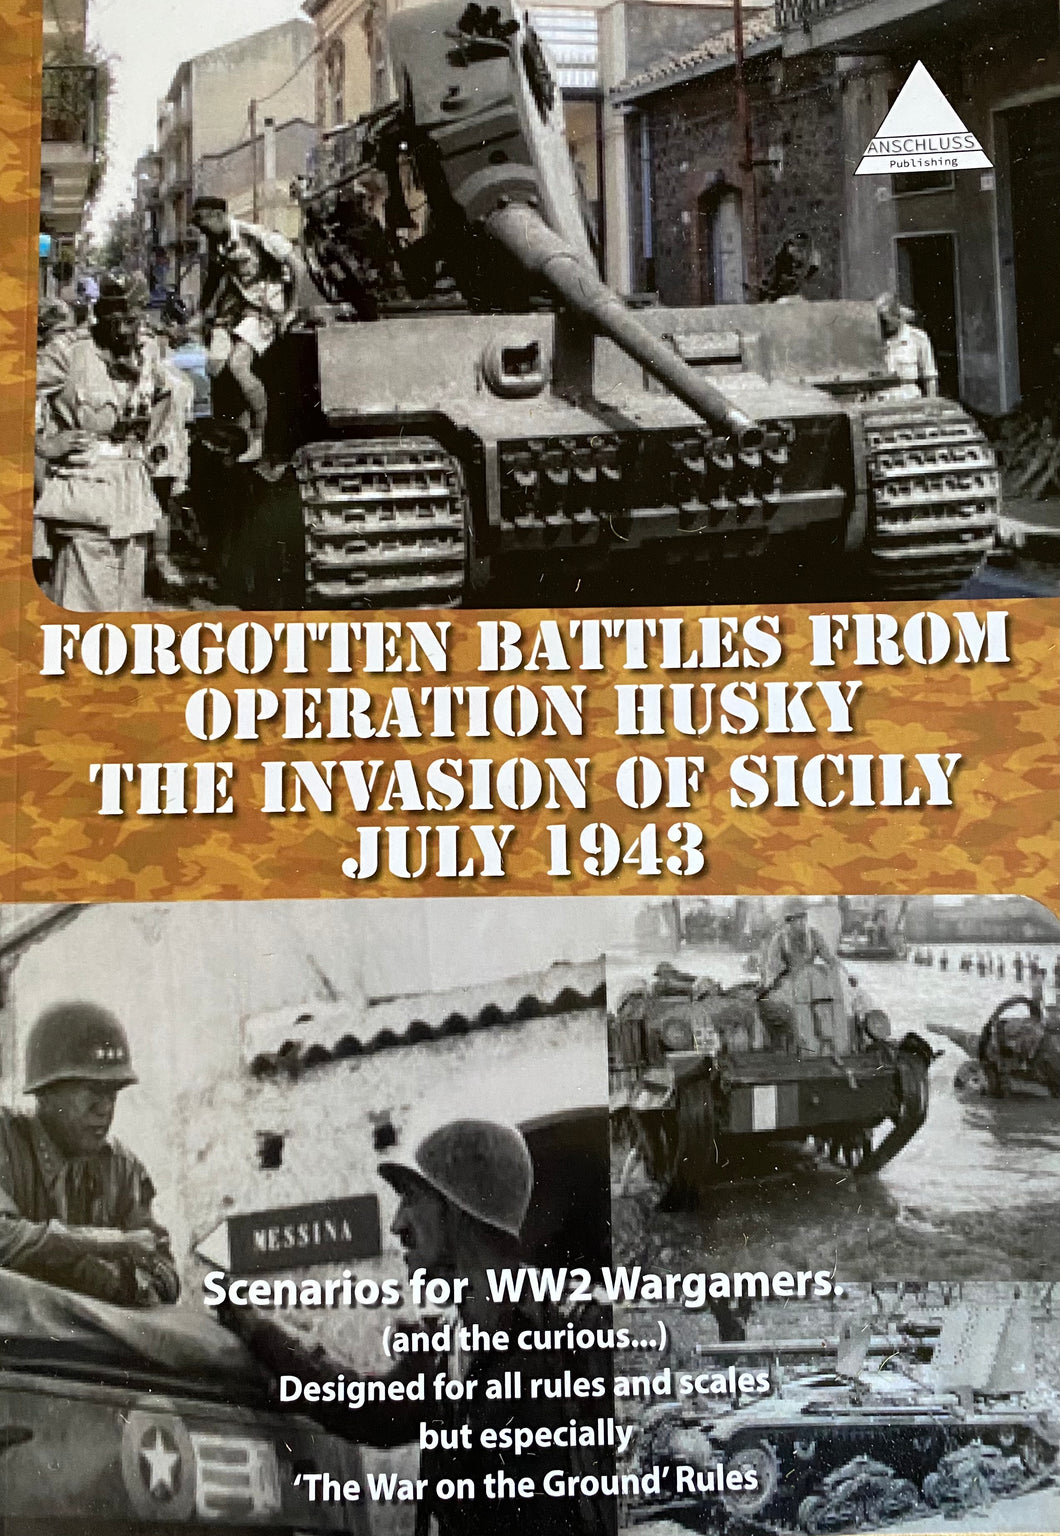 The Forgotten Battles 'Operation Husky', the Invasion of Sicily, July 1943